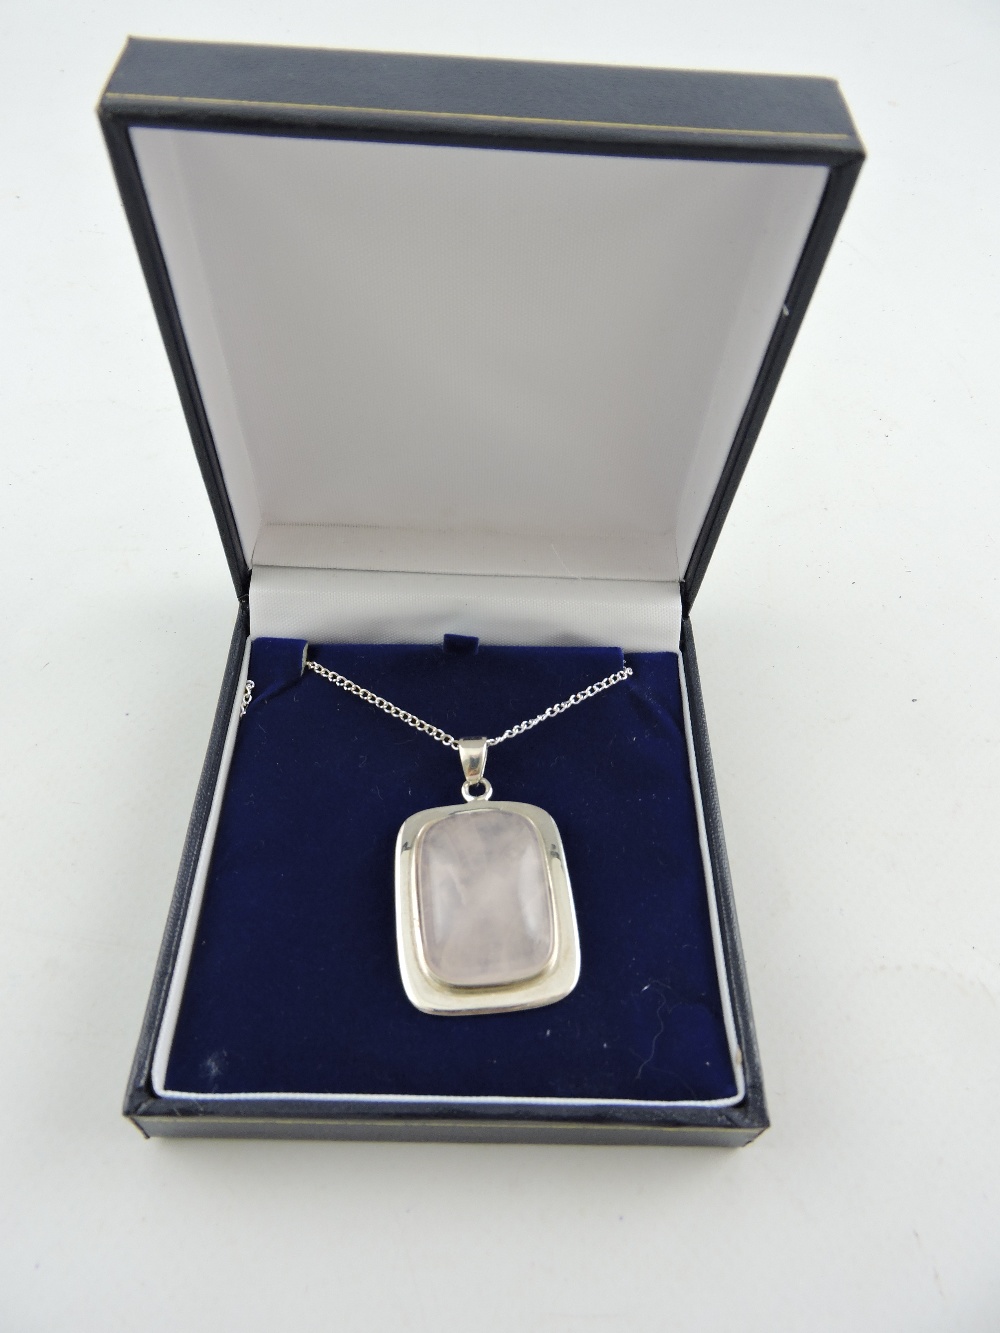 A rock-crystal pendant necklace, - Image 2 of 2